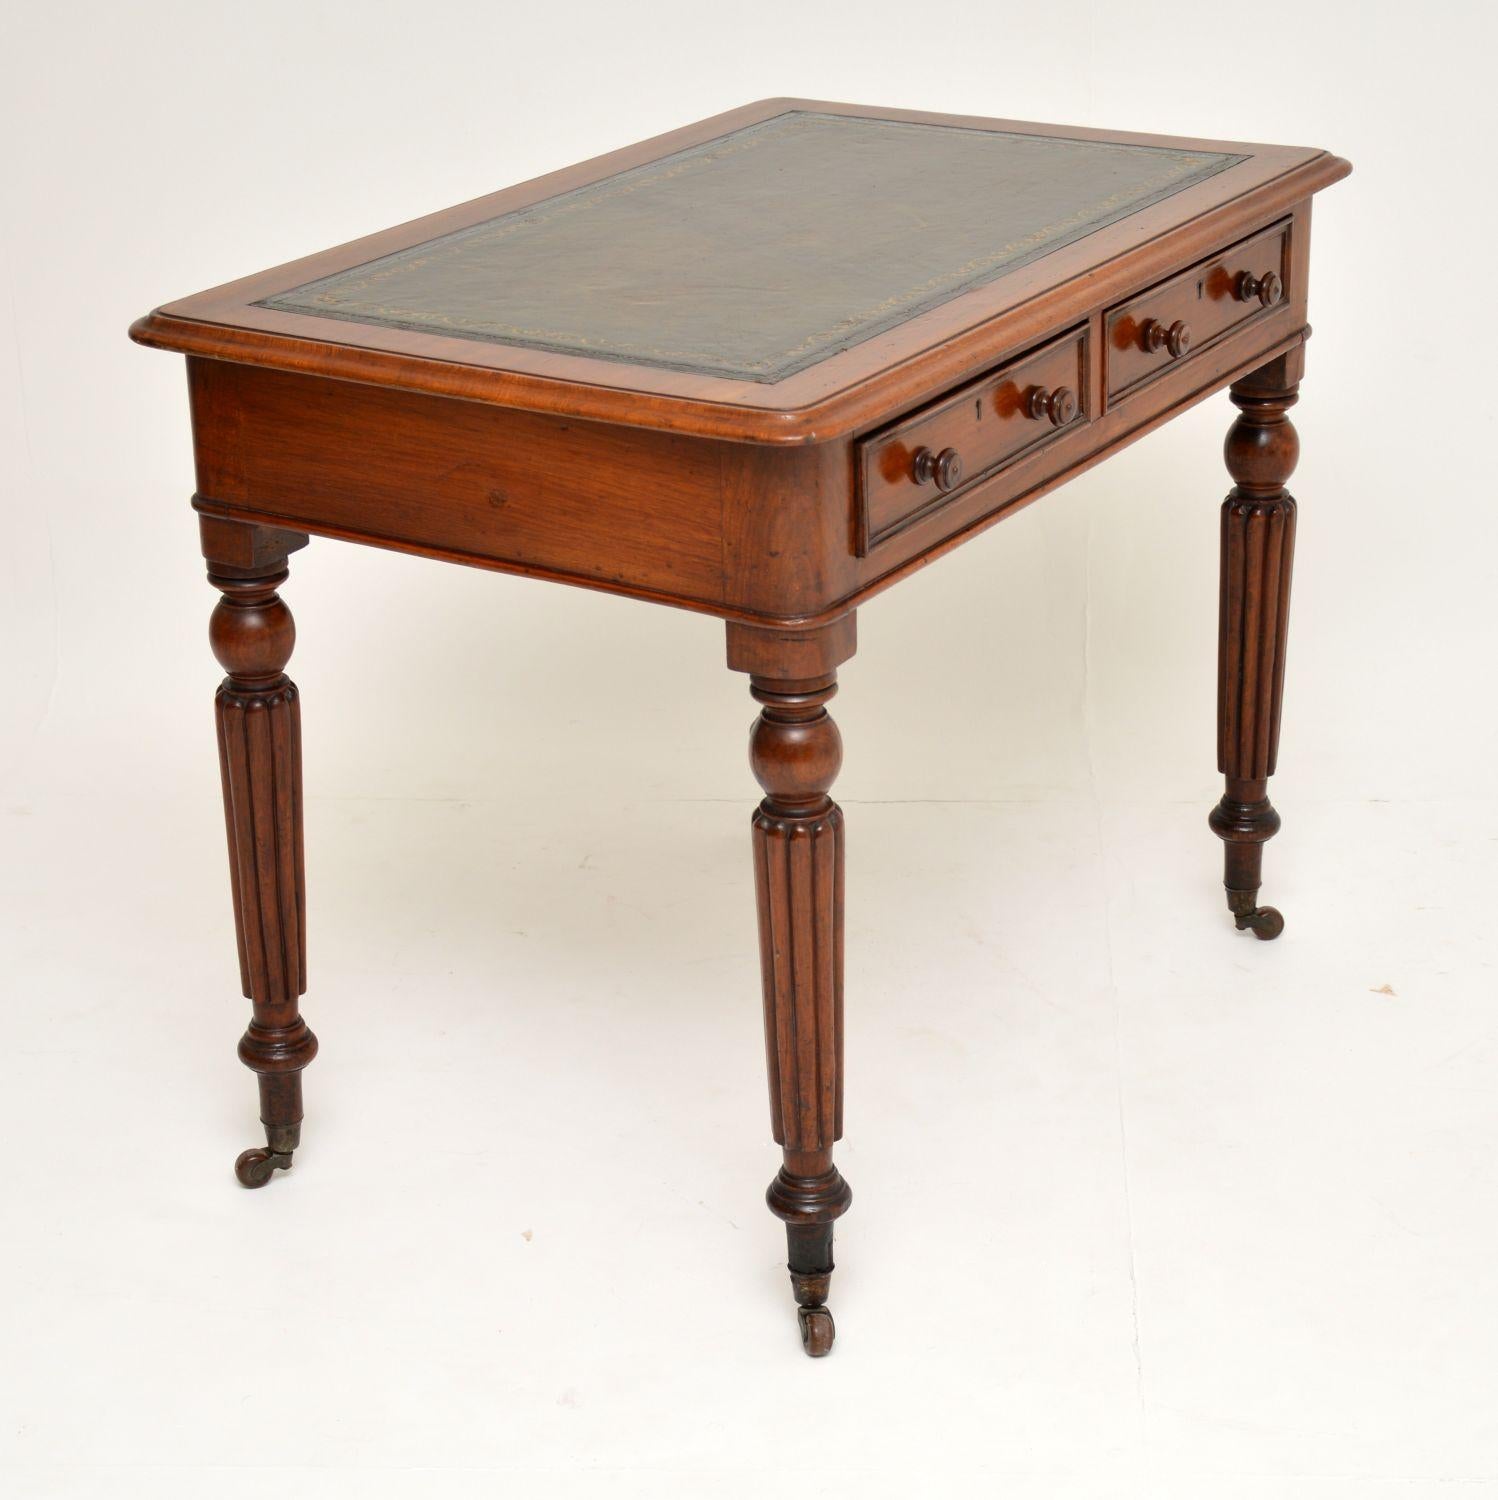 Early Victorian Antique Victorian Mahogany and Leather Writing Table or Desk